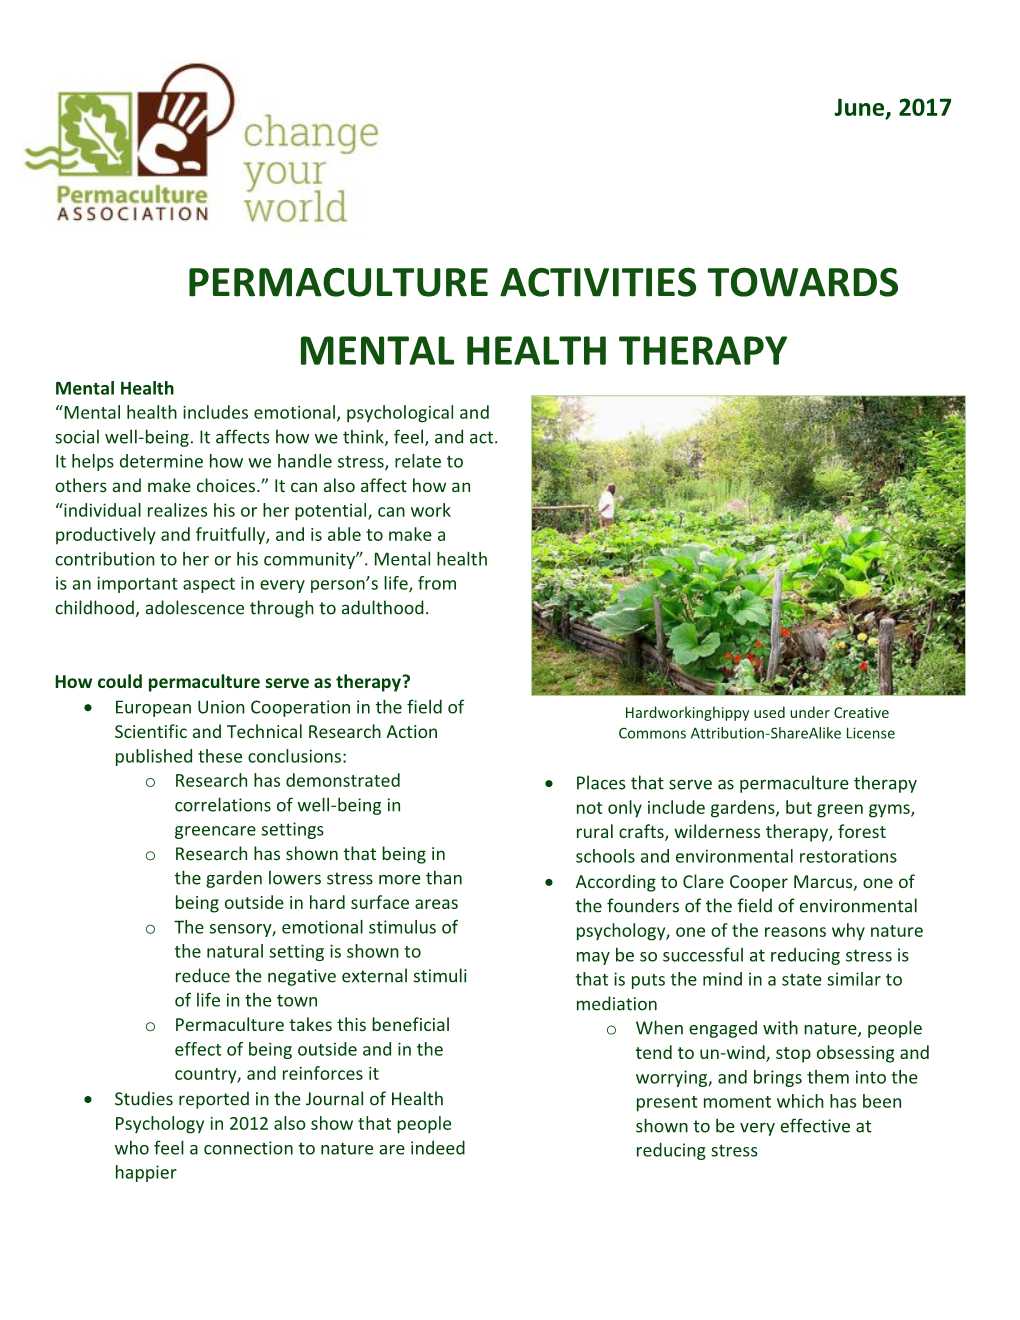 Permaculture and Mental Health